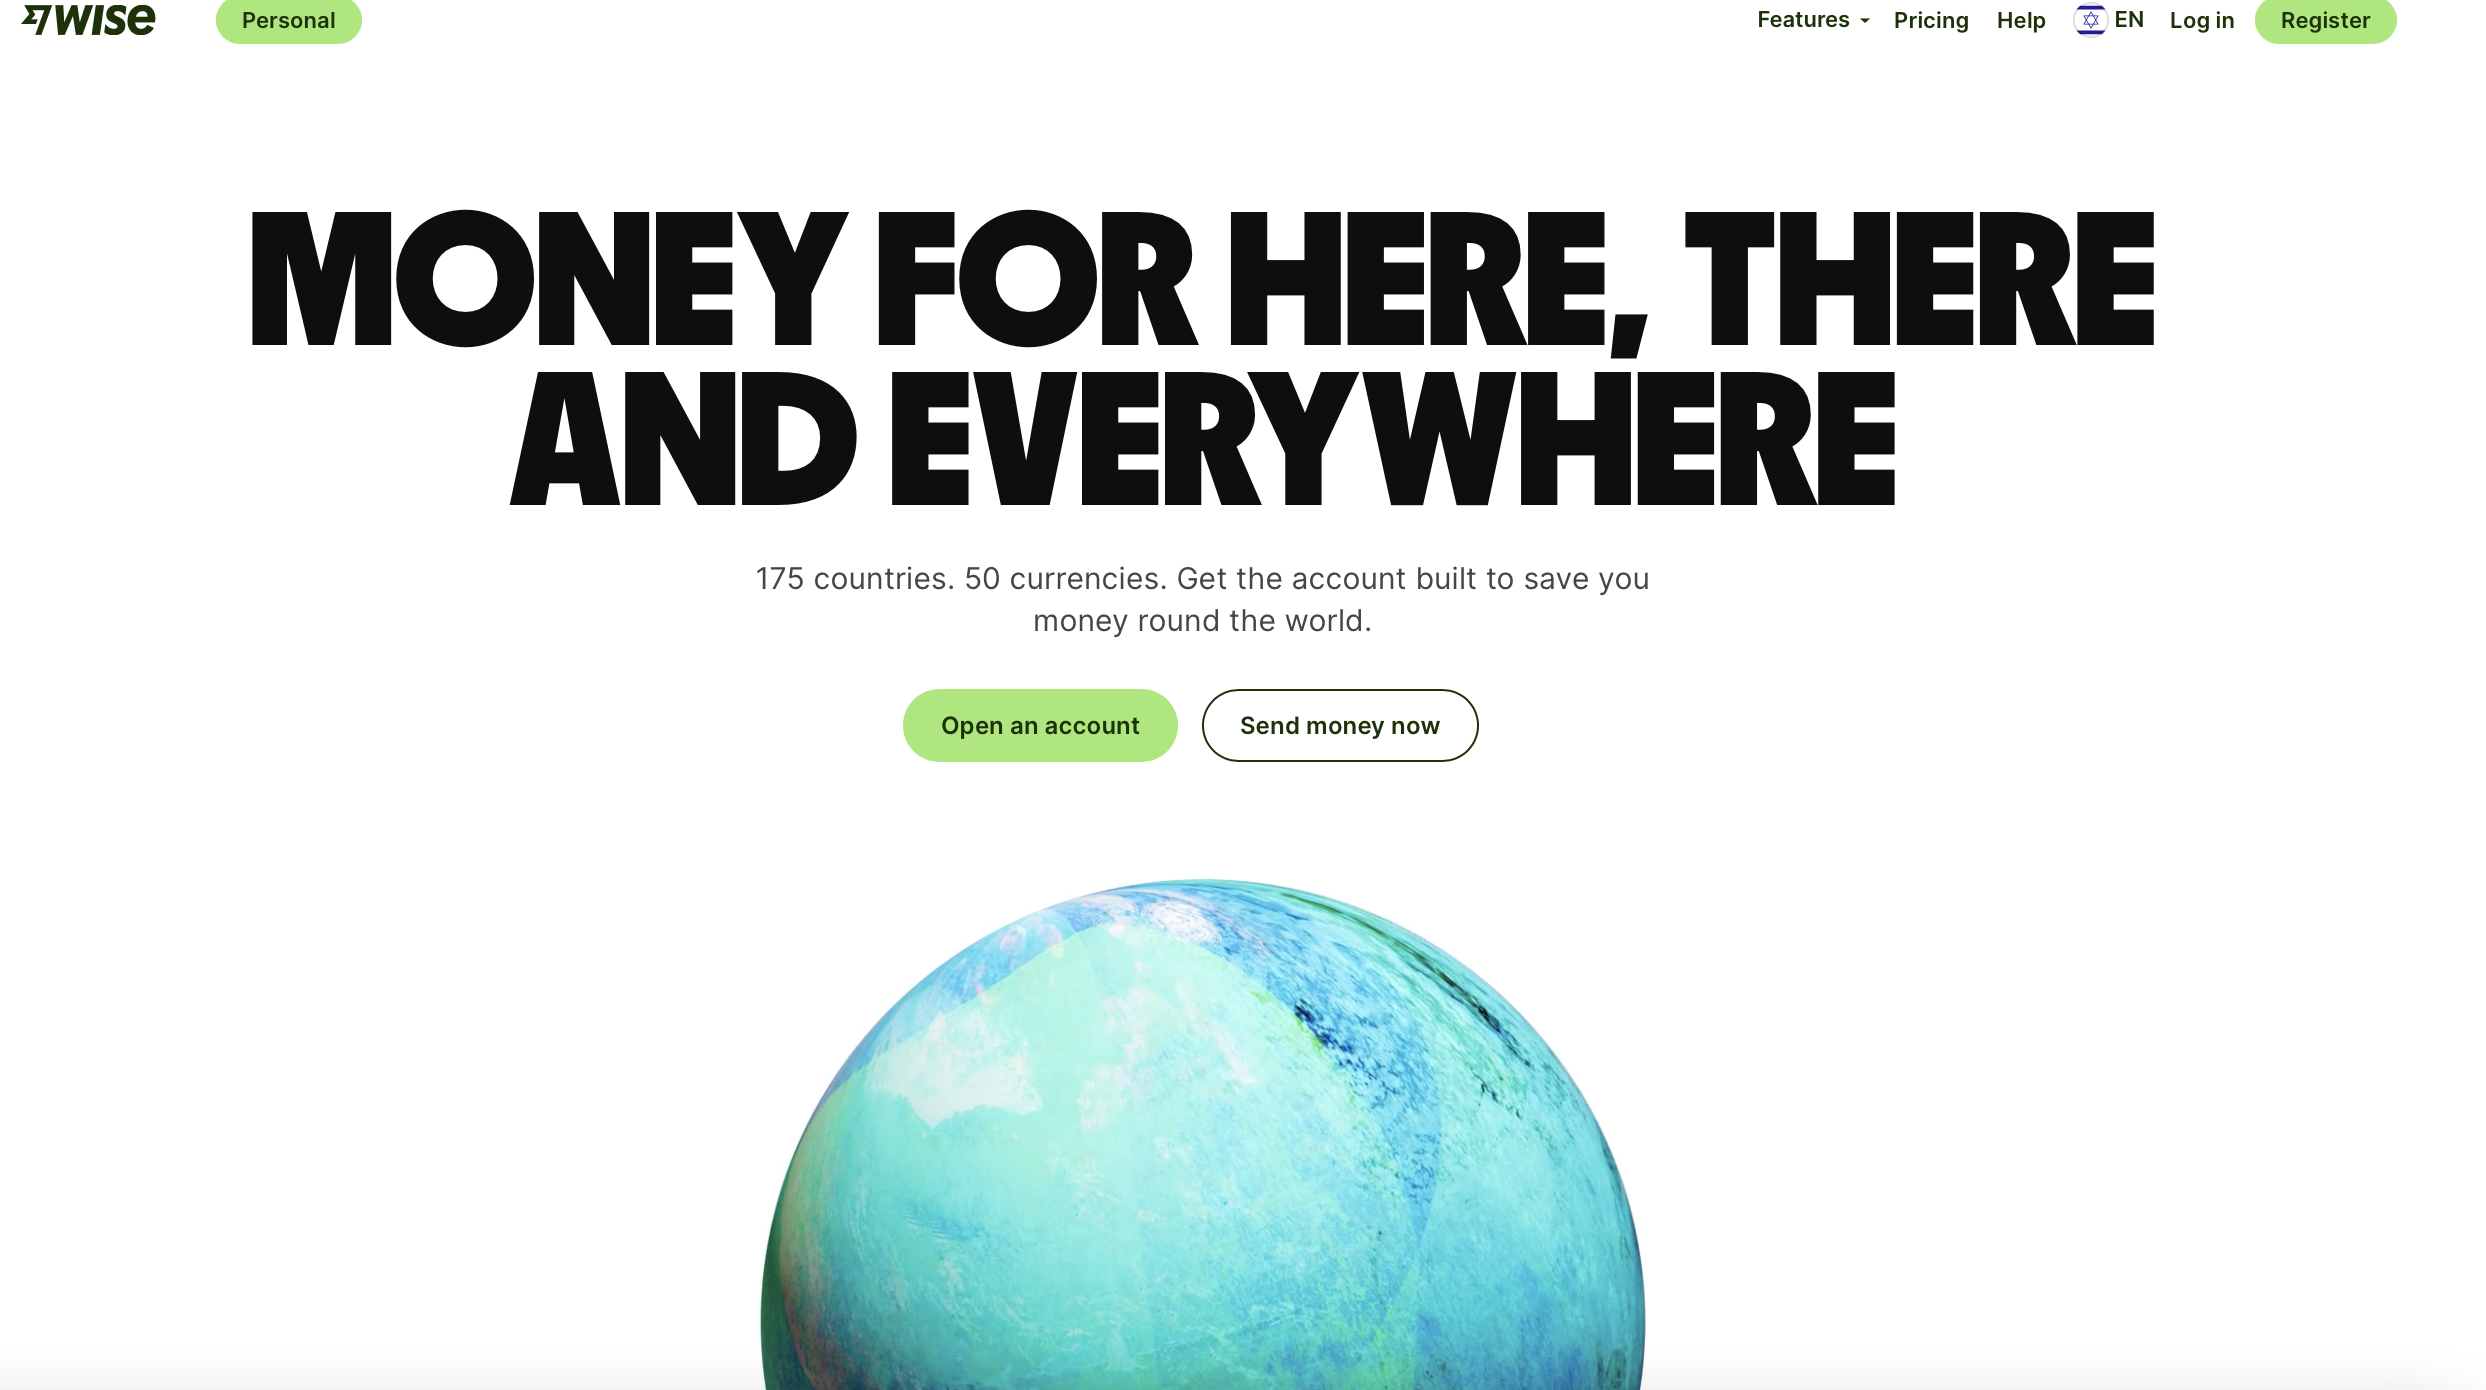 The rebrand has changed Wise's official fonts to big chunky and blocky letters. The pictures features a pastel blue-green globe with soft paper-like textures. 